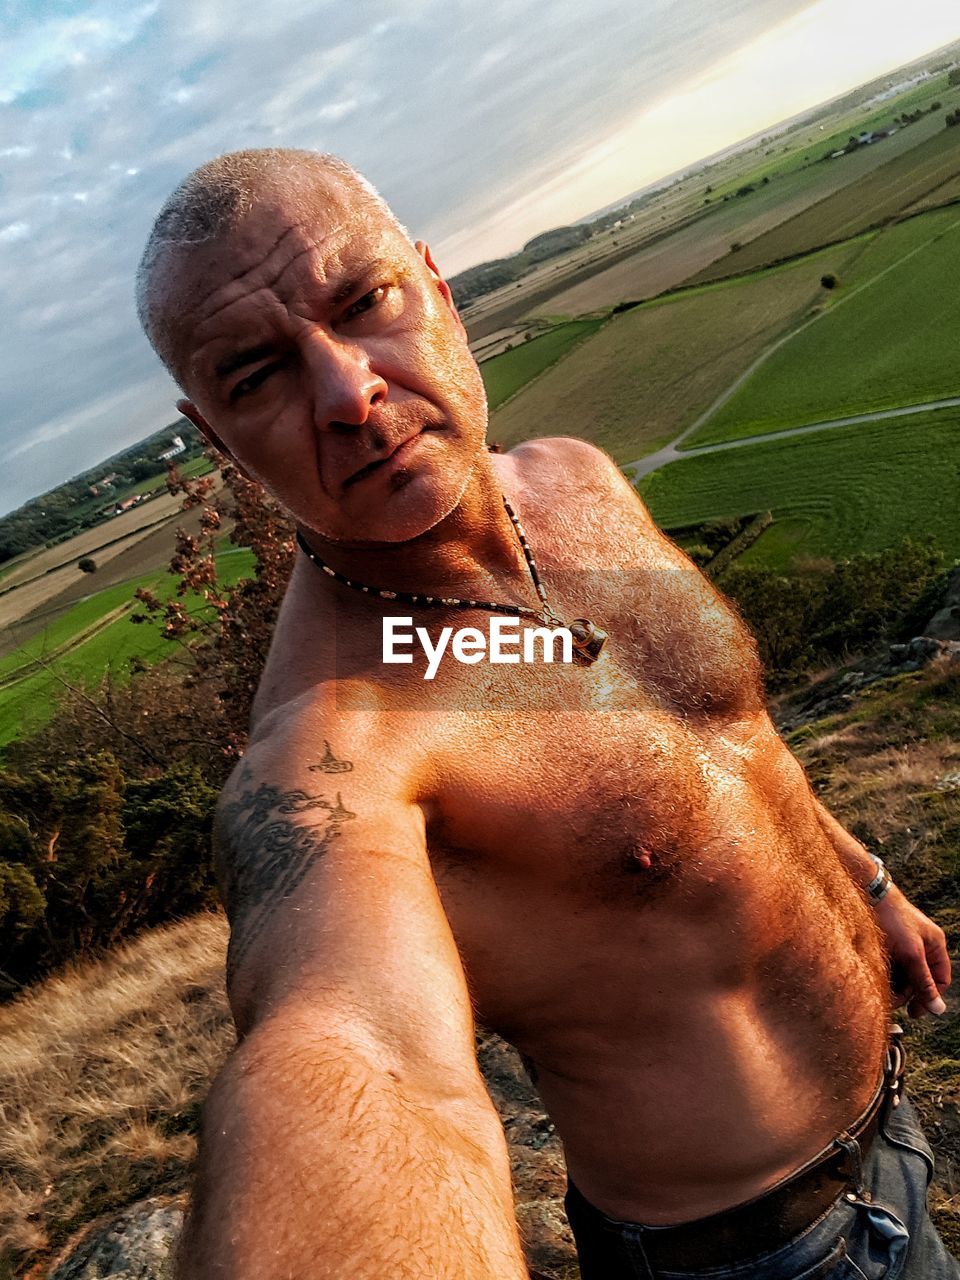 Portrait of shirtless man standing by landscape